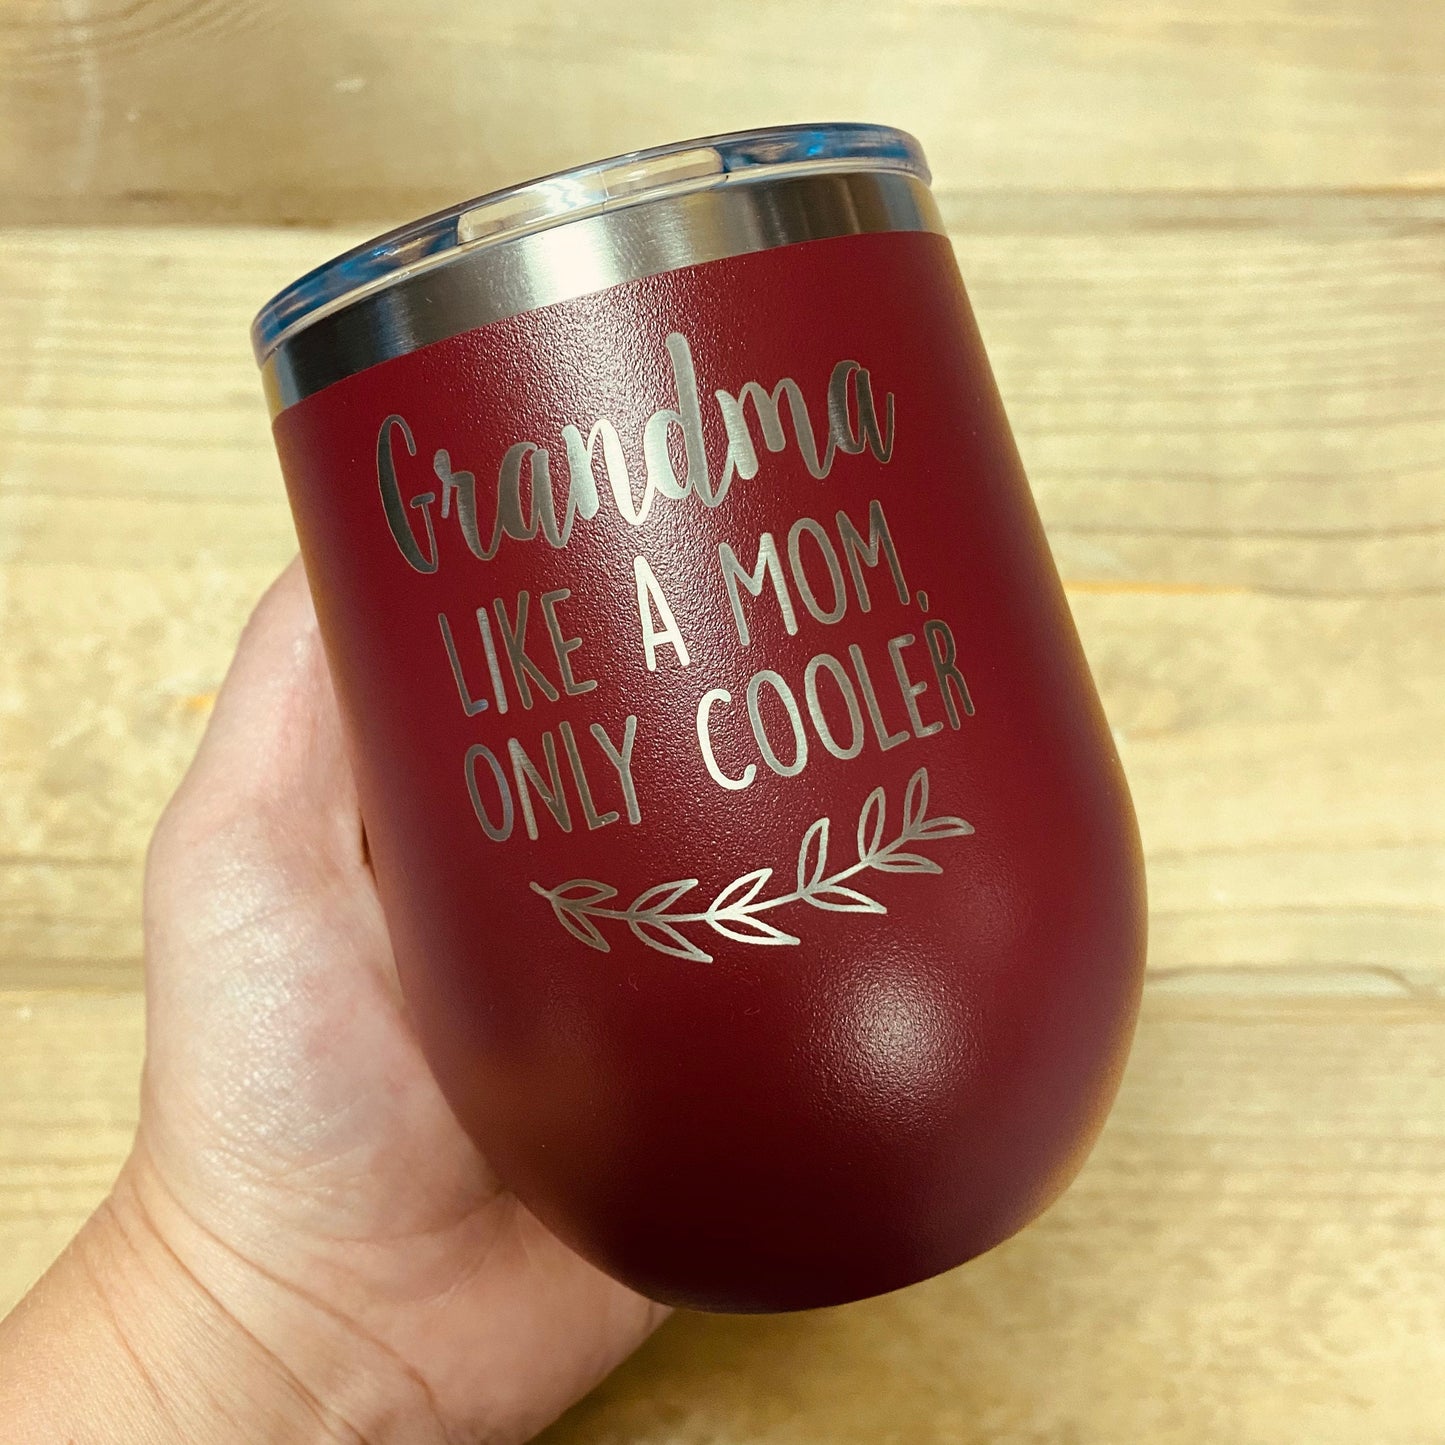 Grandma Like a Mom, Only Cooler 12 oz. Stainless Steel Stemless Wine Glass